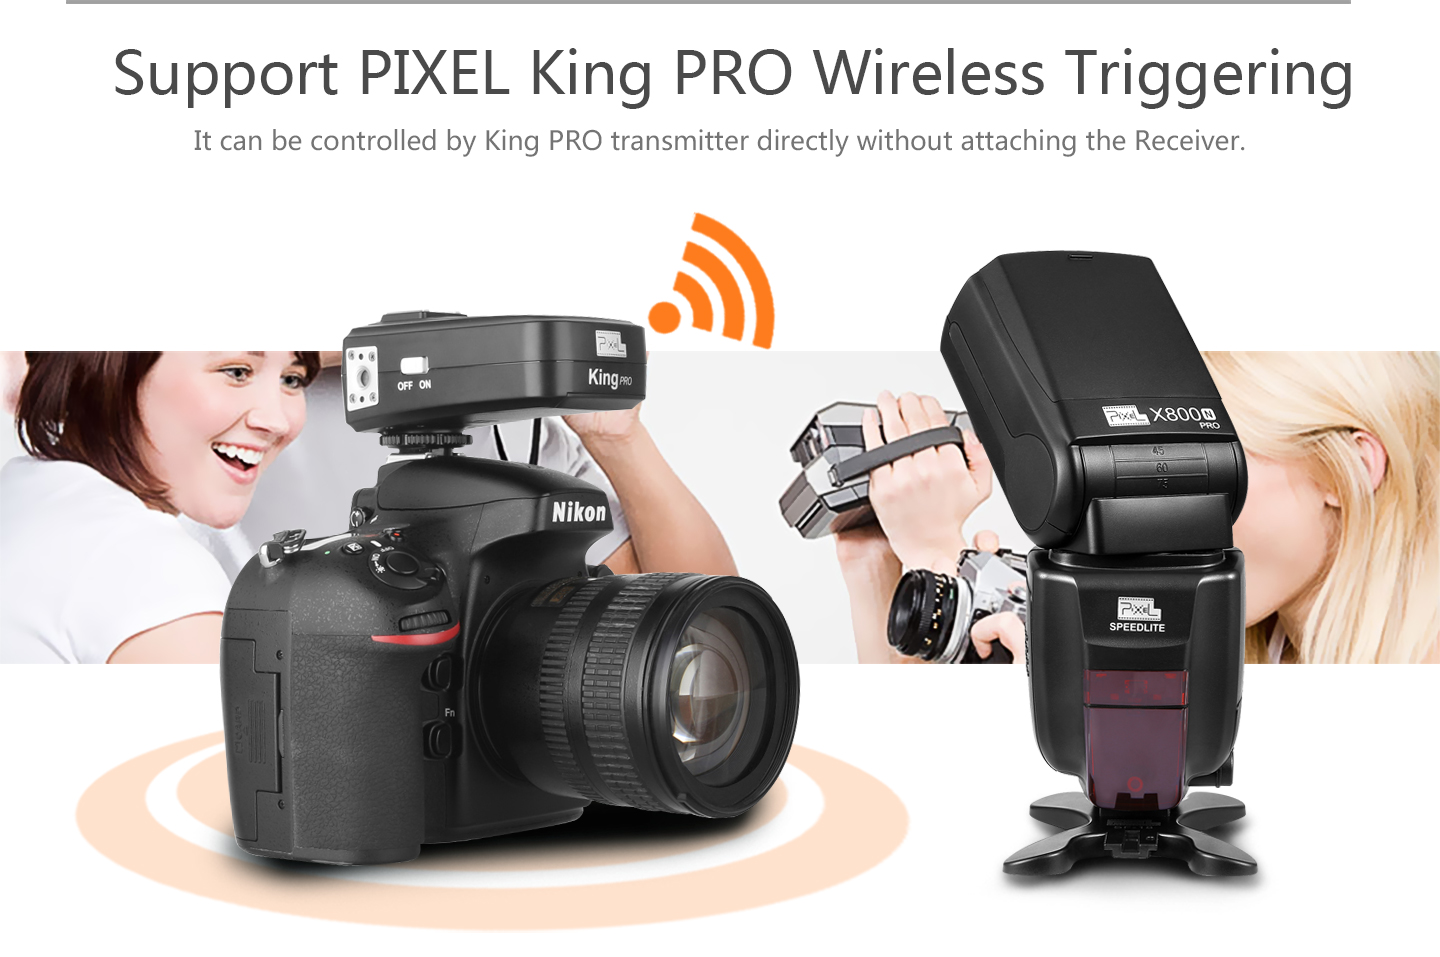 Support PIXEL King PRO Wireless Triggering